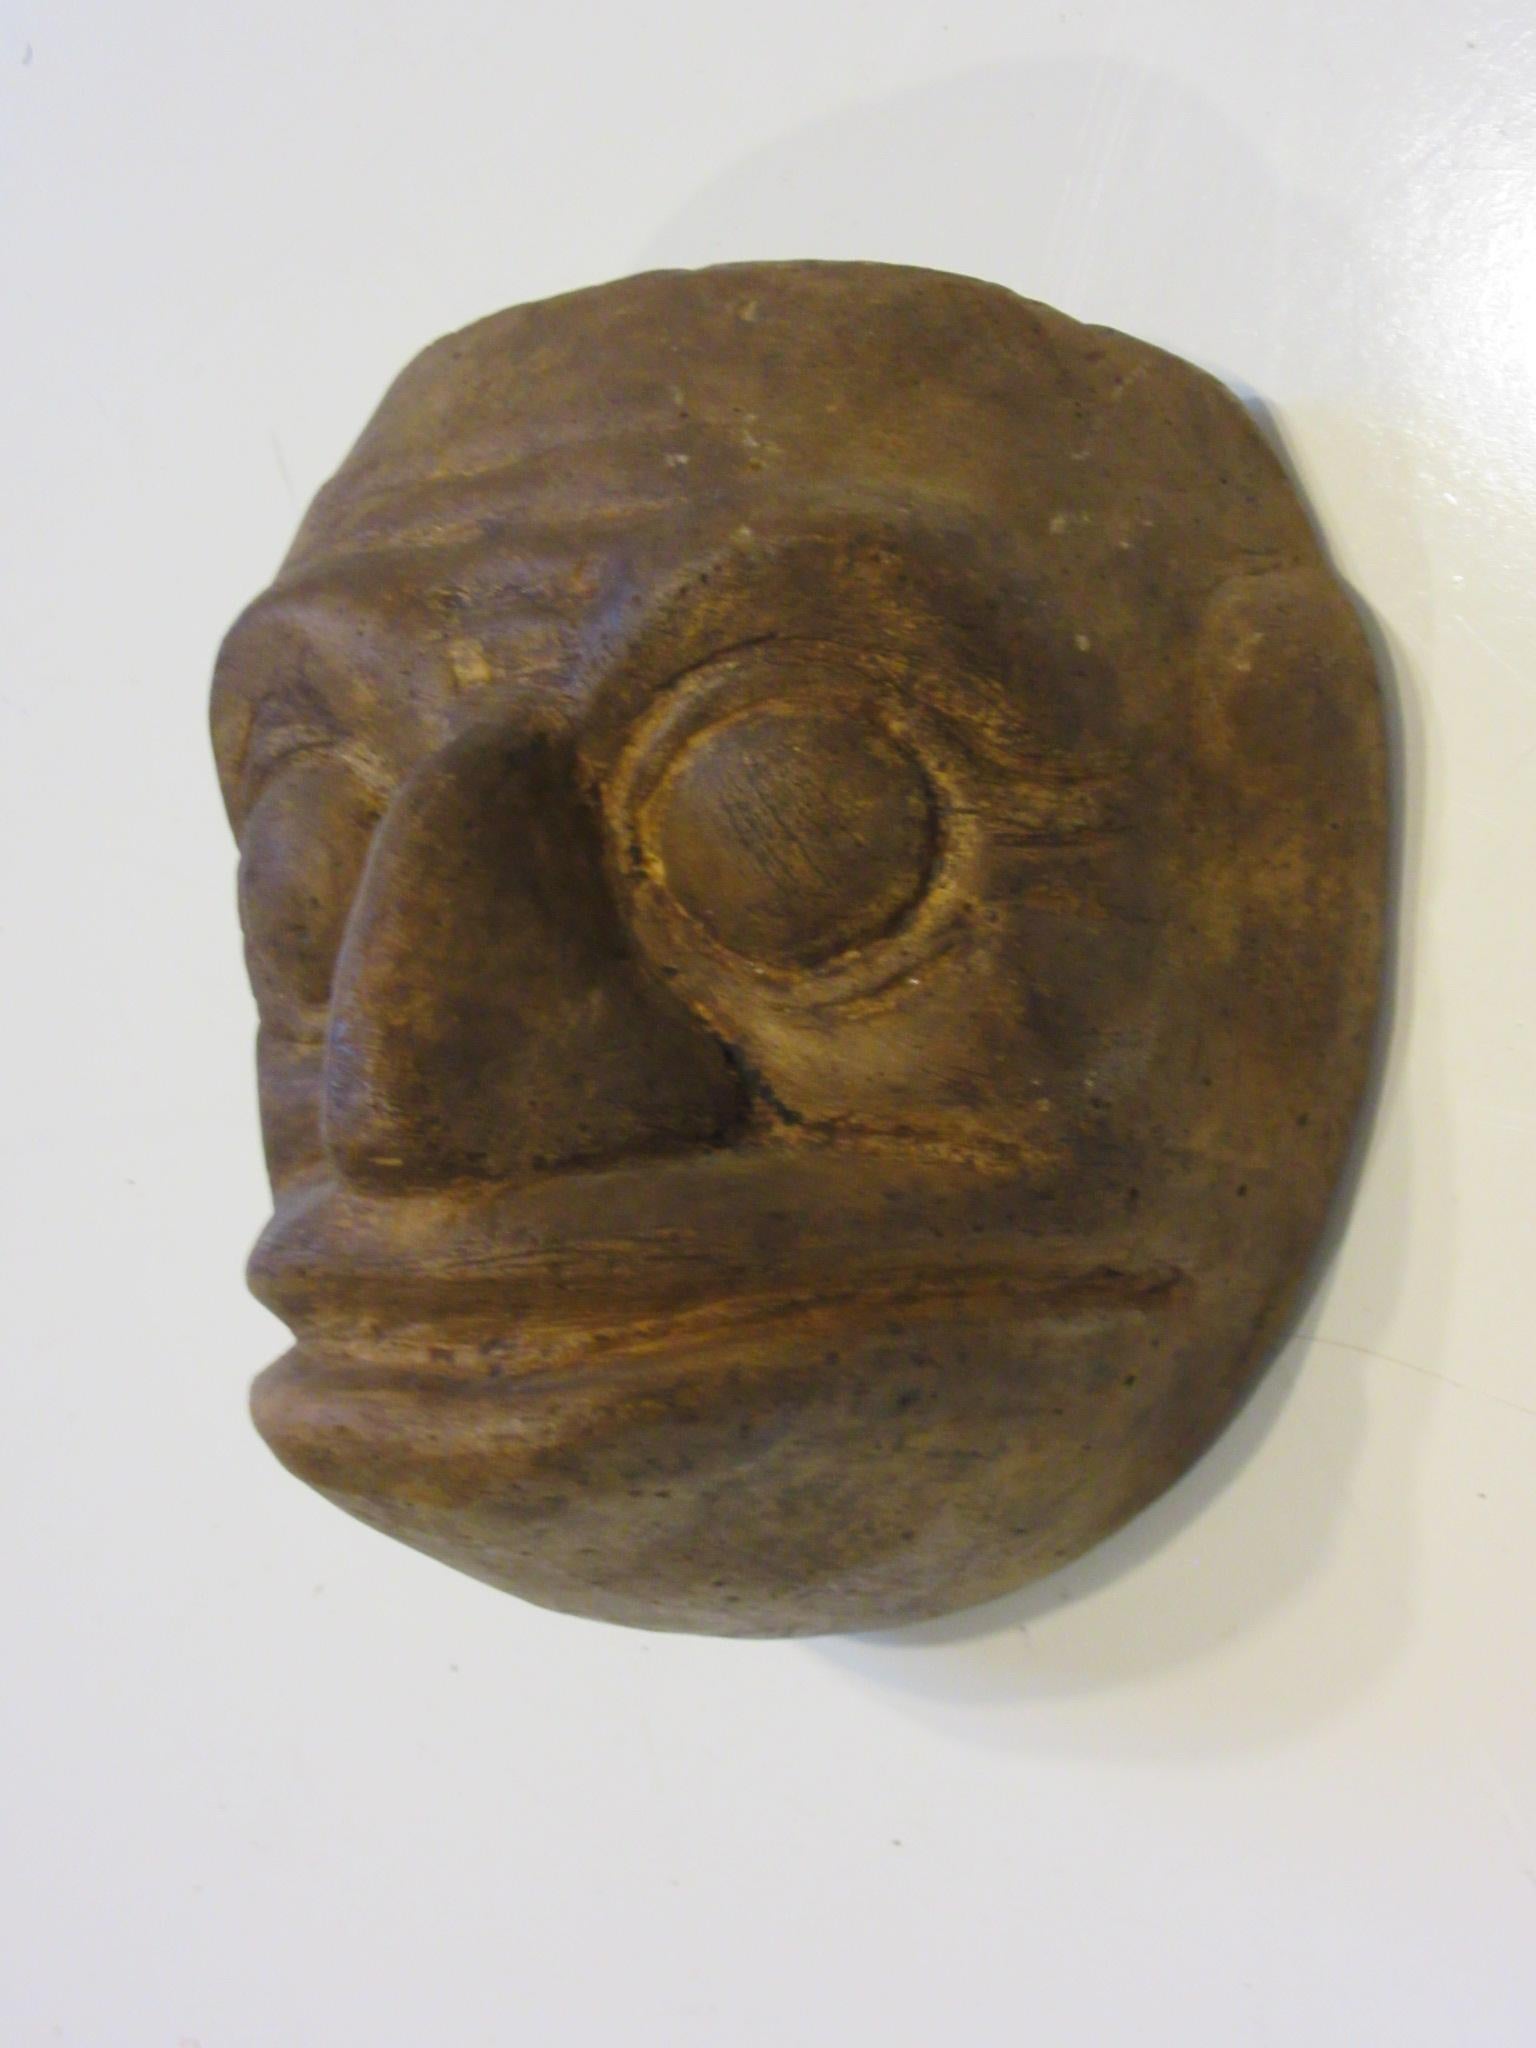 Vintage Mask Mold By the American Mask Co.